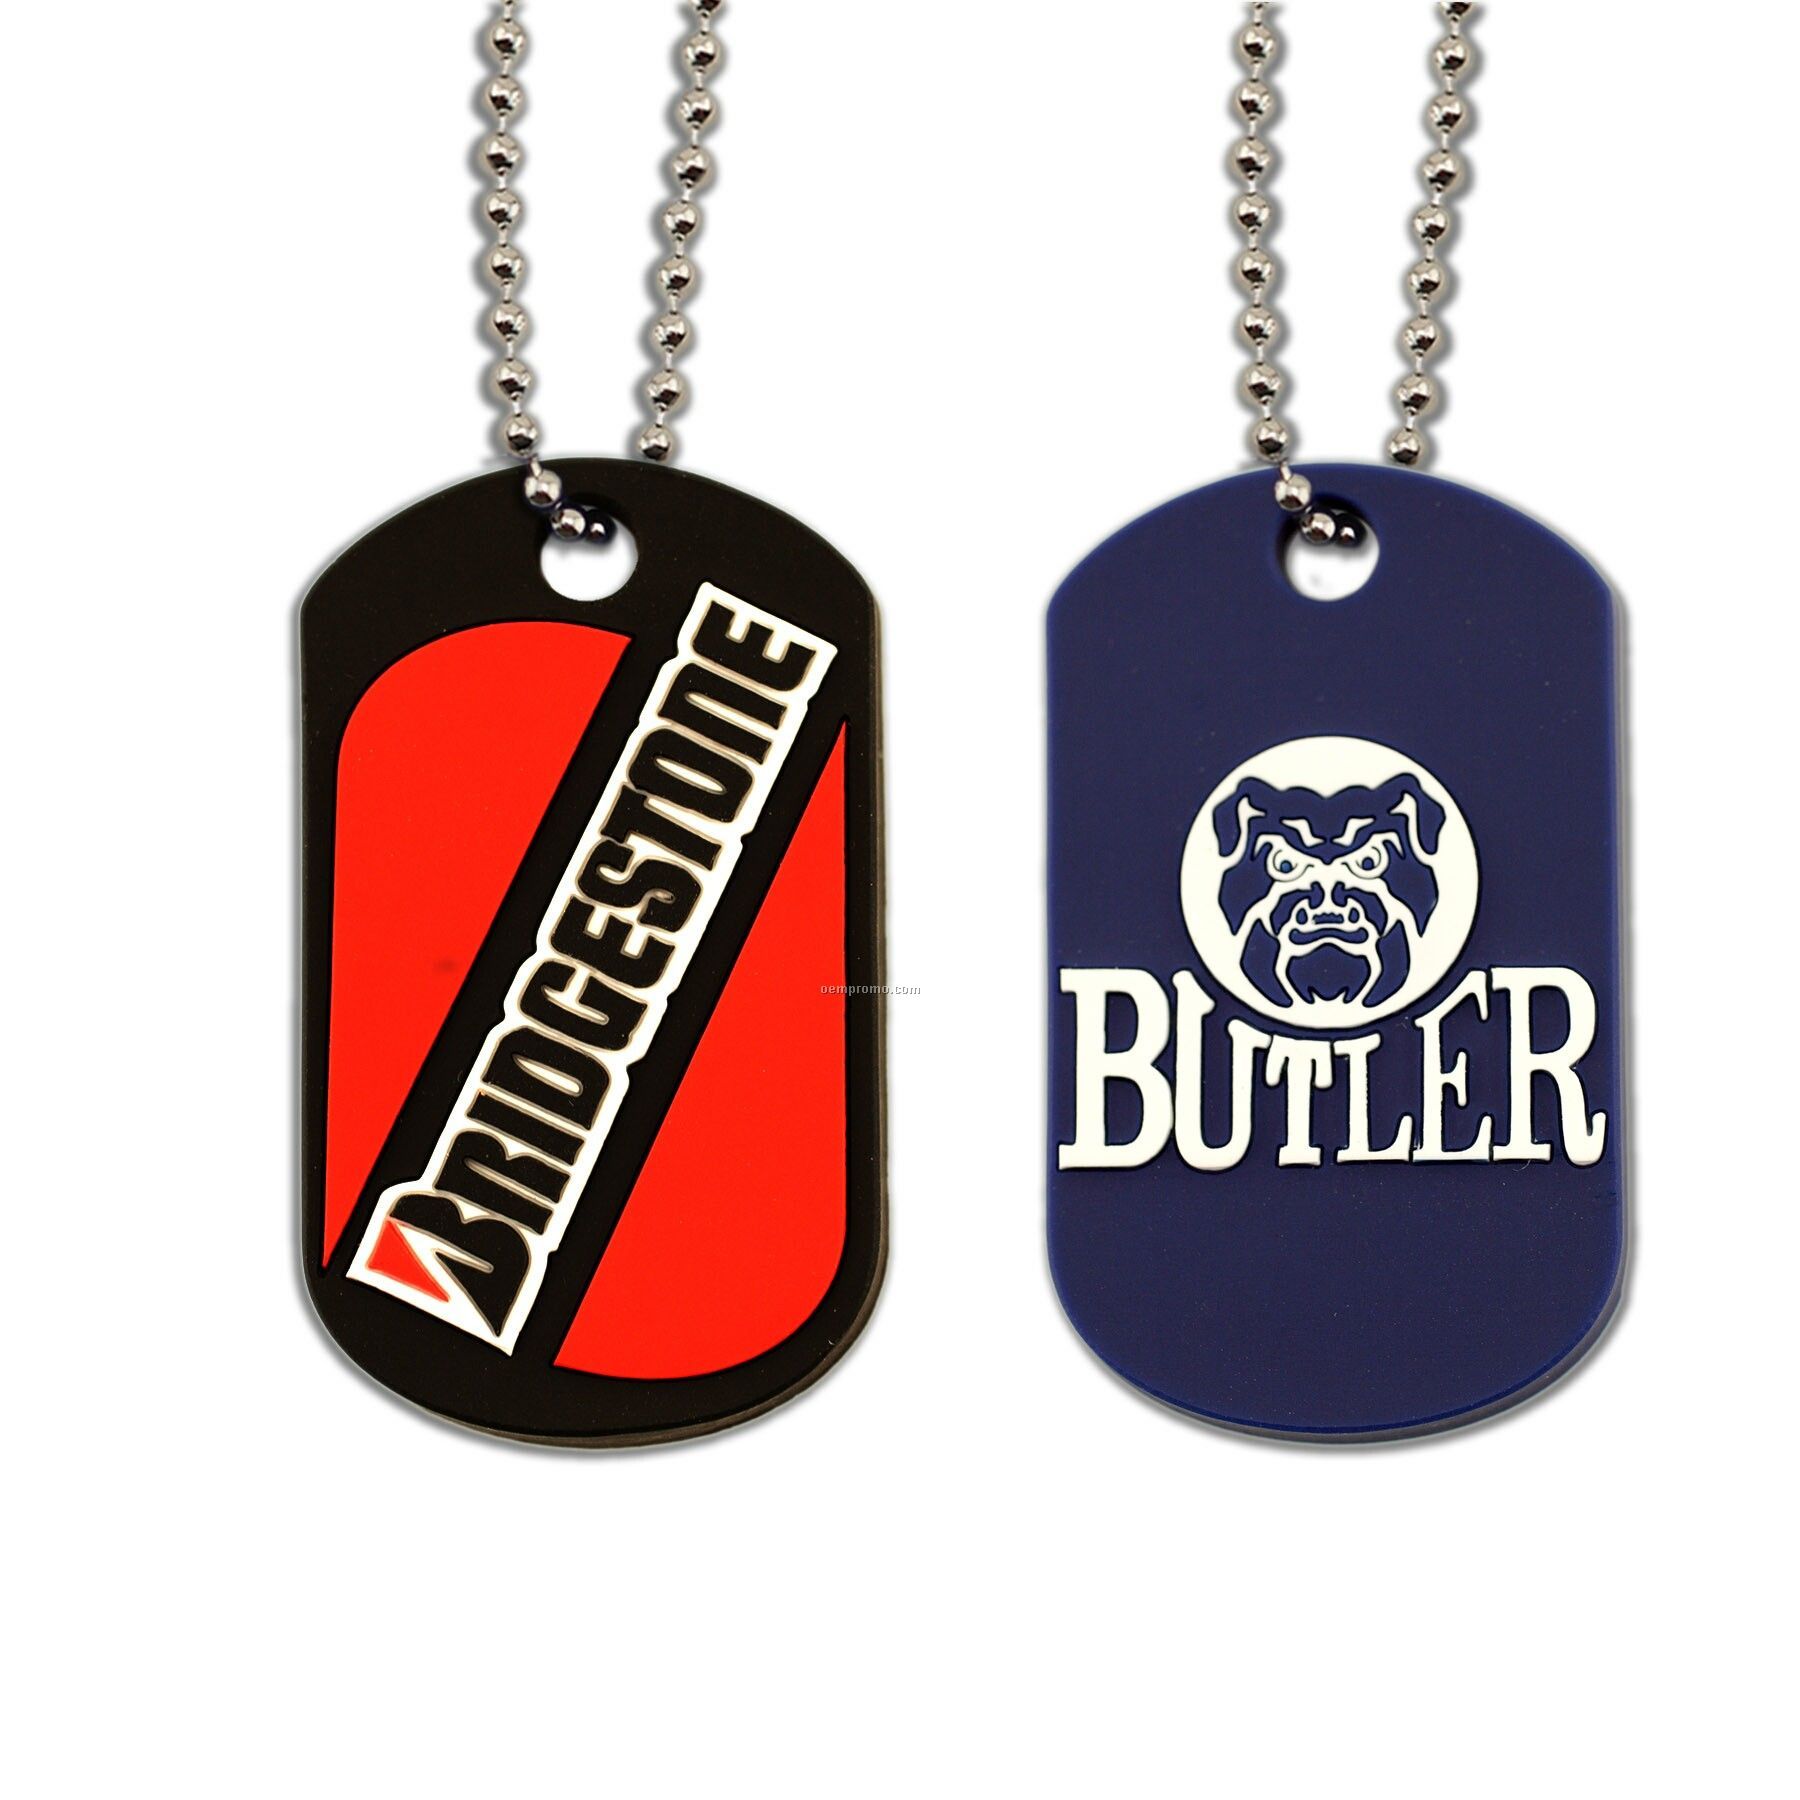 Spectraflex(R) Dog Tag With 2-d Molded Imprint